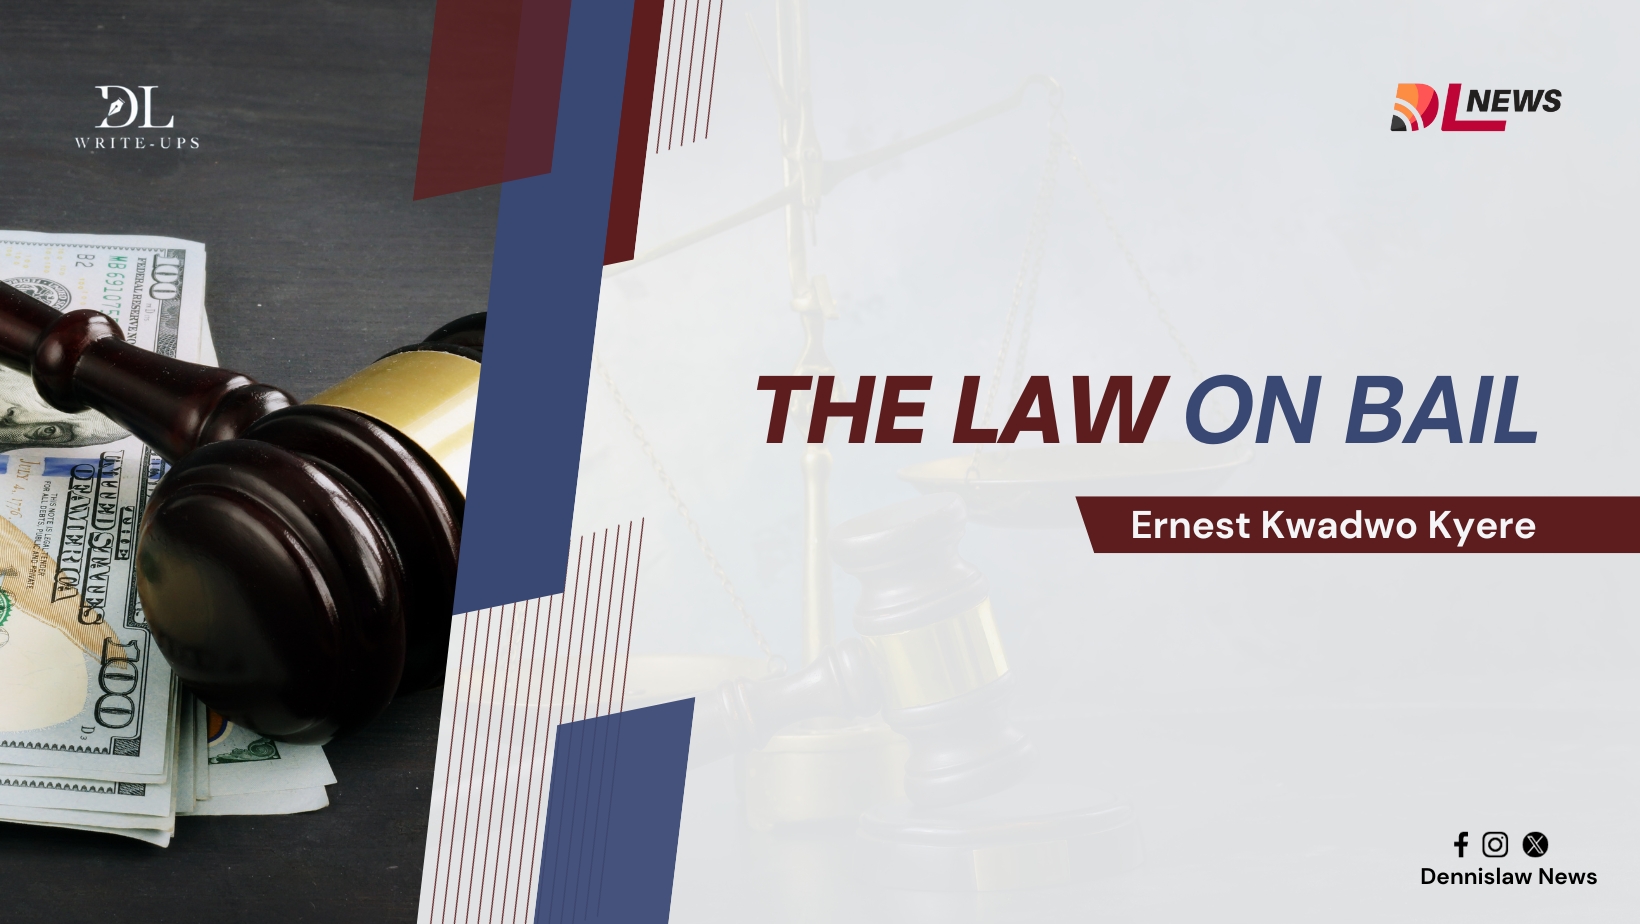 THE LAW ON BAIL IN GHANA; A DEVELOPING JURISPRUDENCE